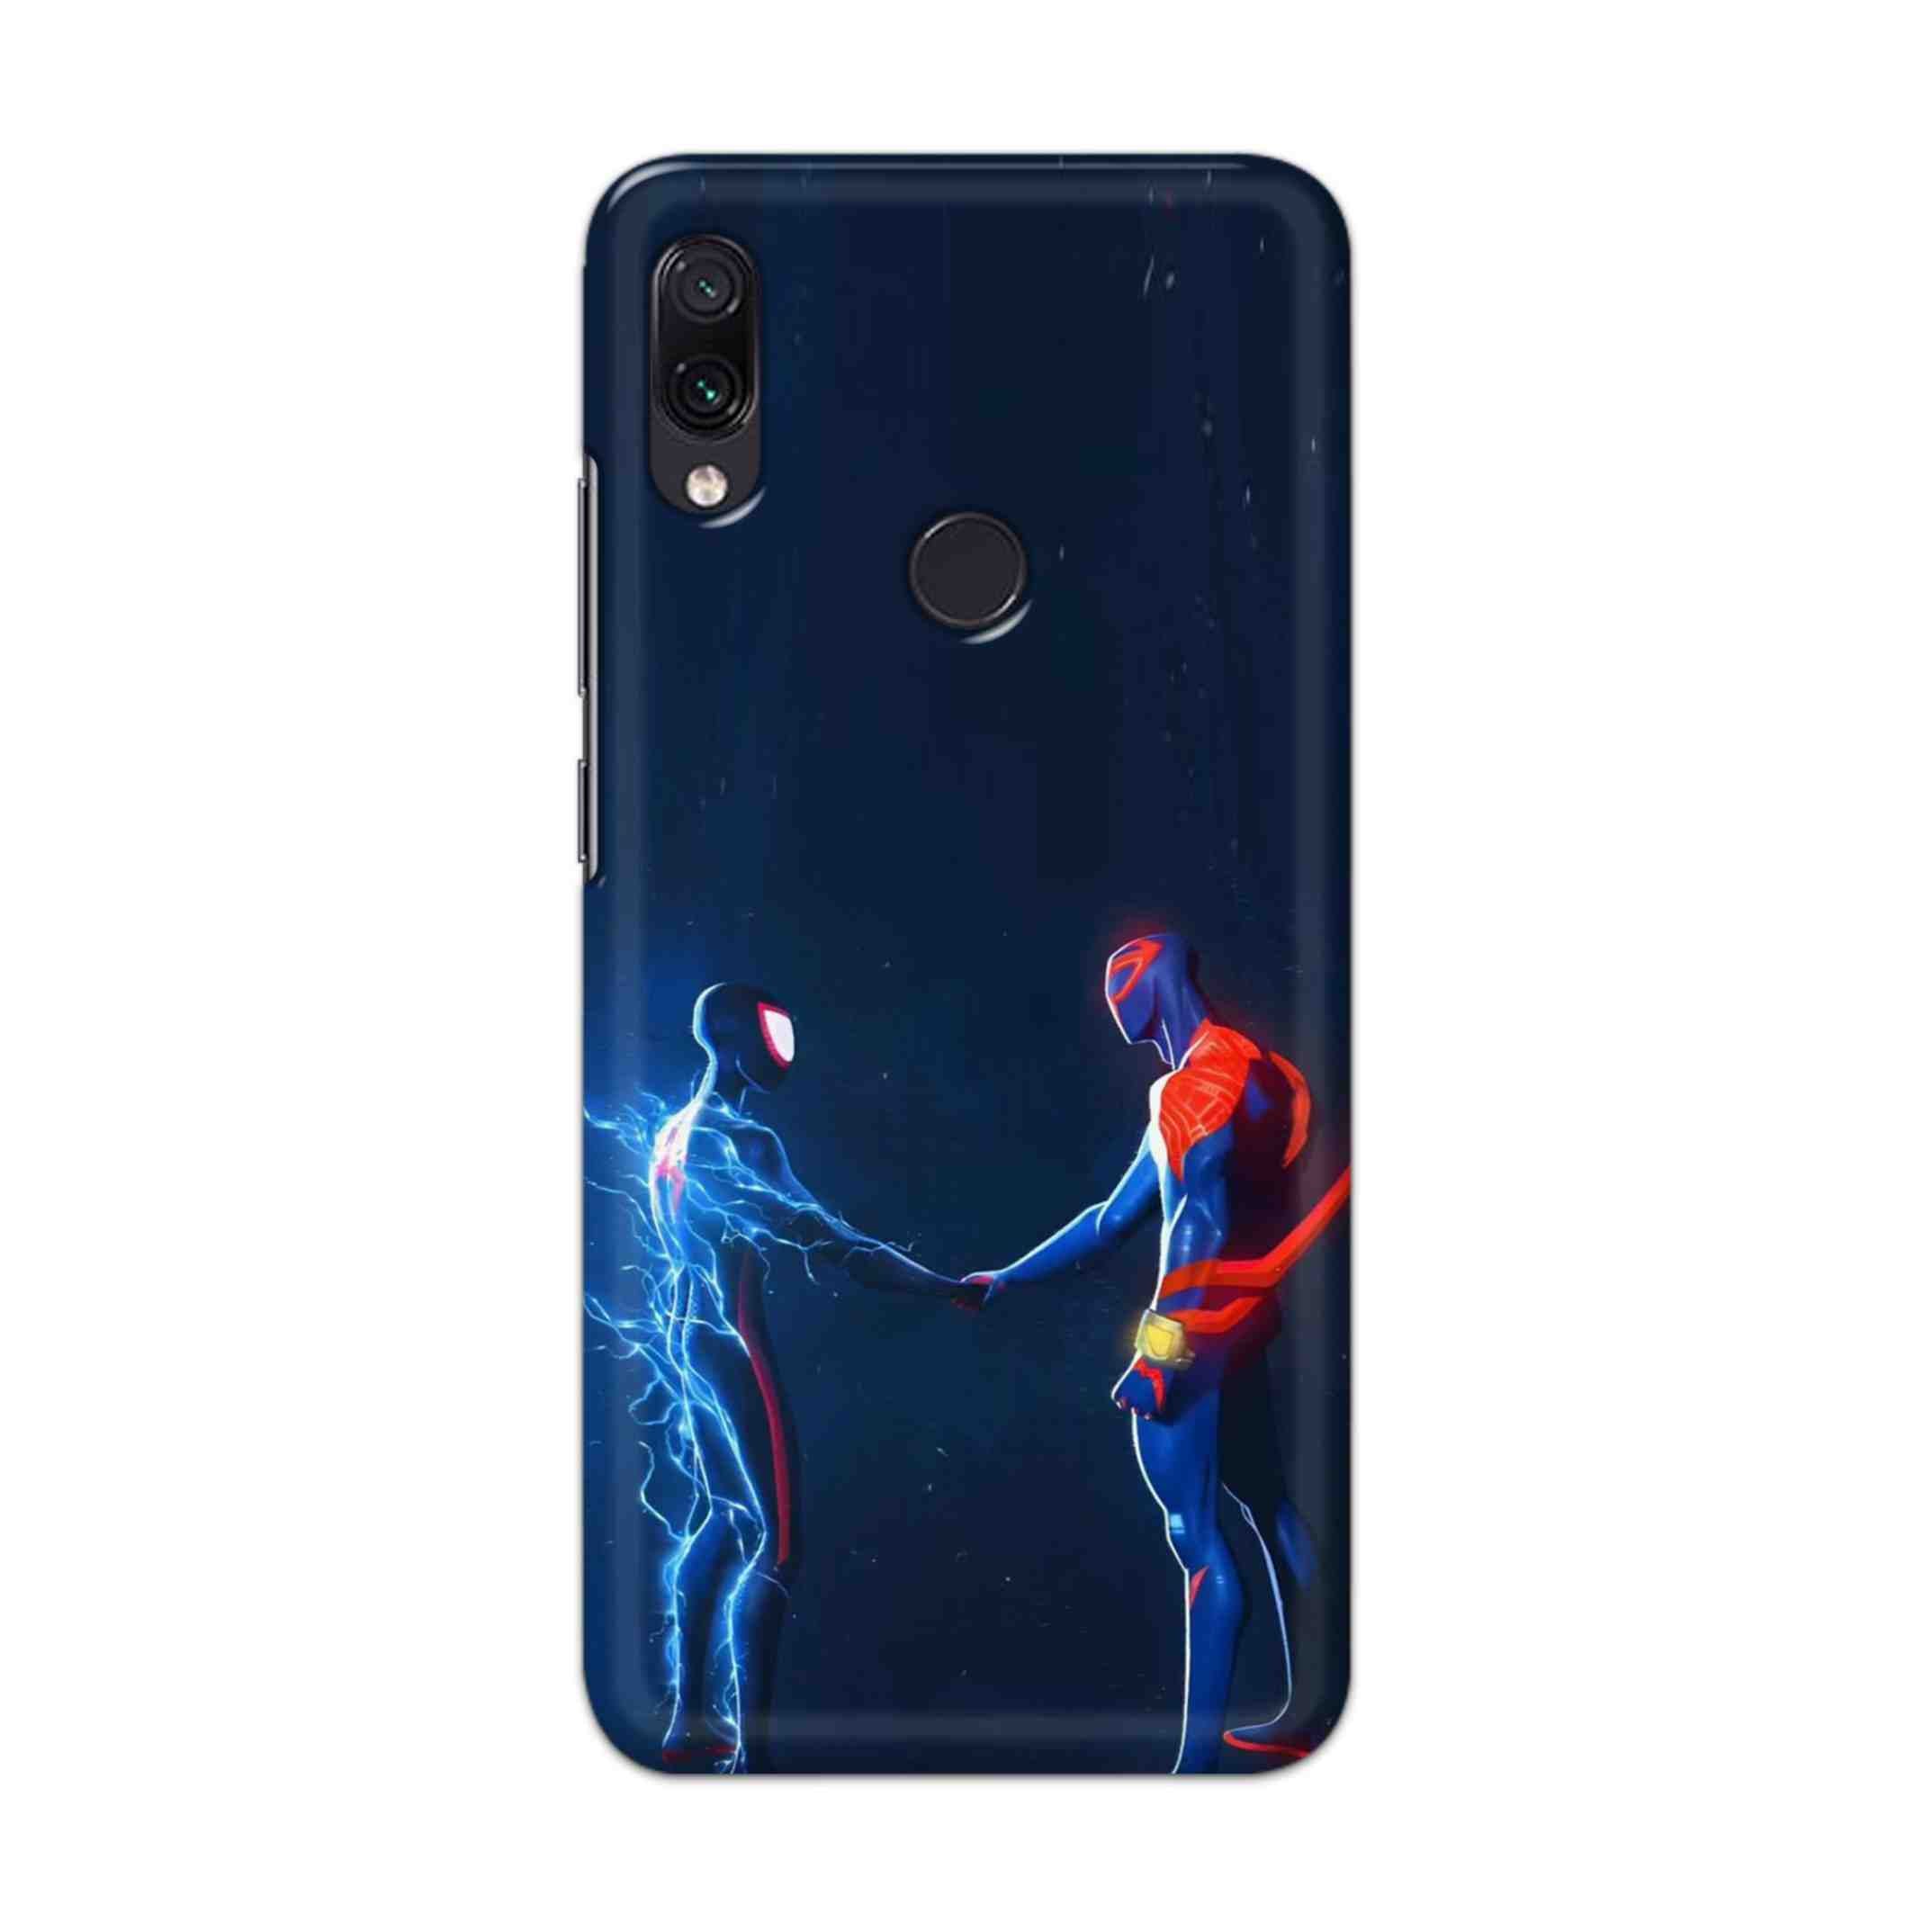 Buy Miles Morales Meet With Spiderman Hard Back Mobile Phone Case Cover For Redmi Note 7 / Note 7 Pro Online